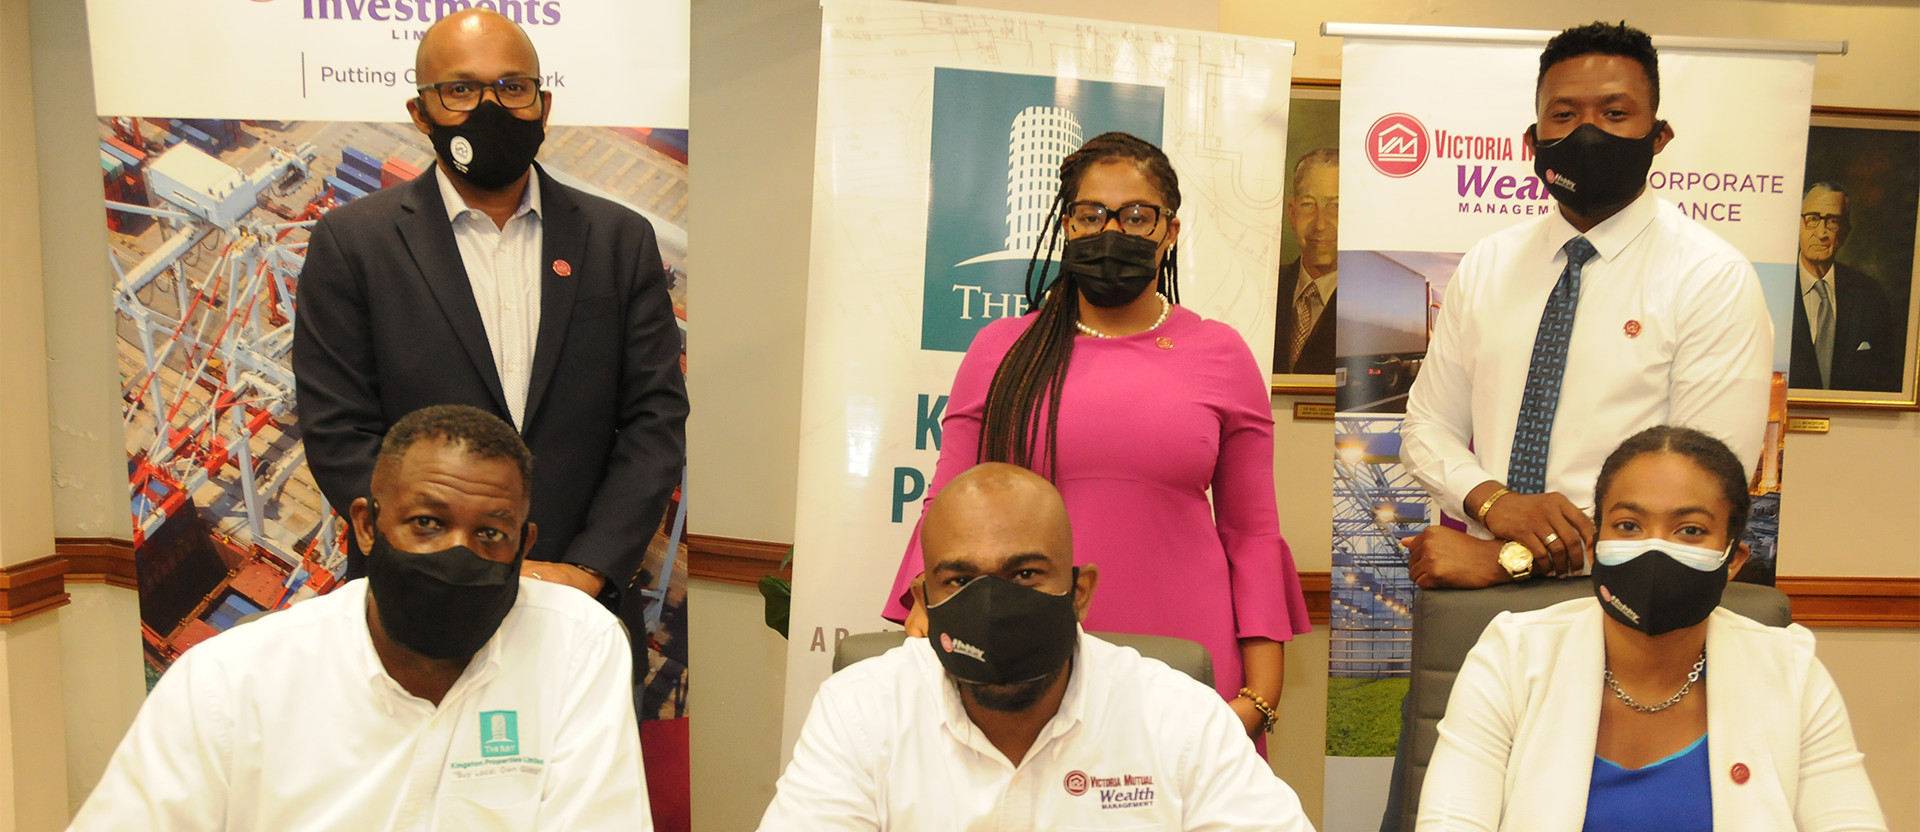 (From left, seated) Kevin Richards (left), CEO, Kingston Properties Limited; Dwight Jackson, Assistant Vice President, Corporate Finance, Victoria Mutual Wealth Management Ltd.; and Karla Brown, Acting Assistant Manager, Capital Markets, is joined by Rezworth Burchenson (standing, from left), CEO, Victoria Mutual Investment Limited (VMIL) & VM Wealth; Roxanne Christian-White, Assistant Manager, Corporate Finance; and Jovaughn Vanriel, Corporate Finance Officer, following a signing ceremony at the Victoria Mutual corporate offices on Friday (May 28), to ink a $700 million bridge loan deal between VMIL and Kingston Properties.